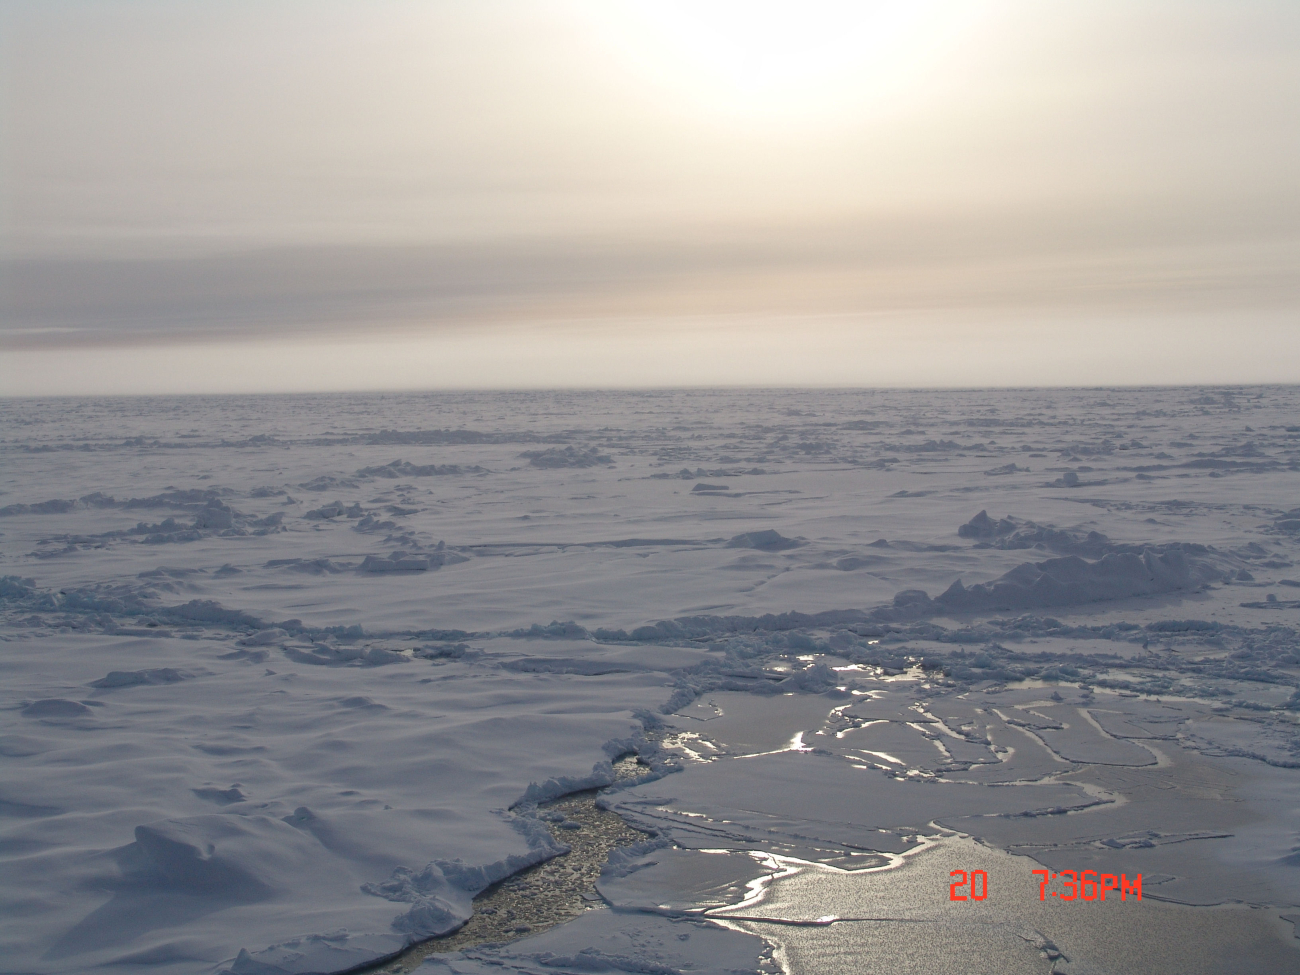 Second or multi-year pack-ice with ridges extending to the horizon